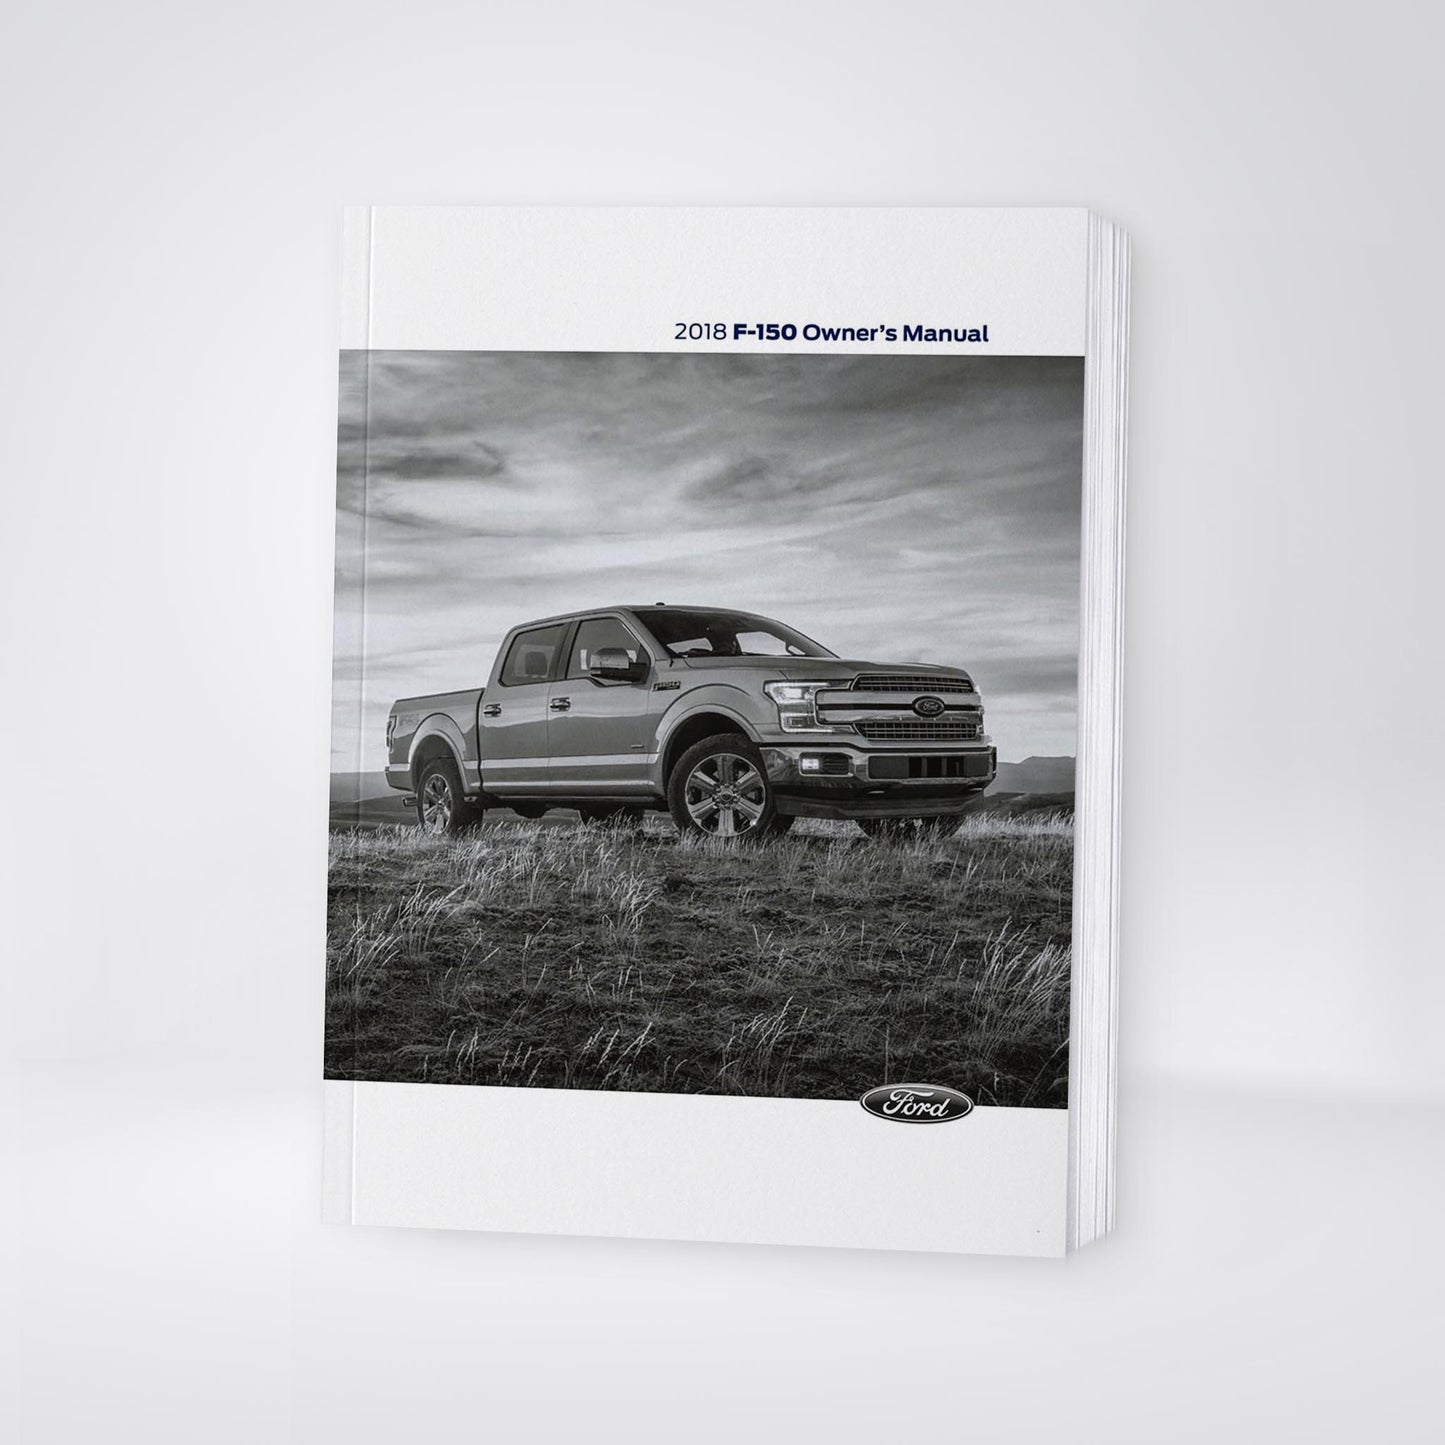 Ford F-150 Owner's Manual 2018